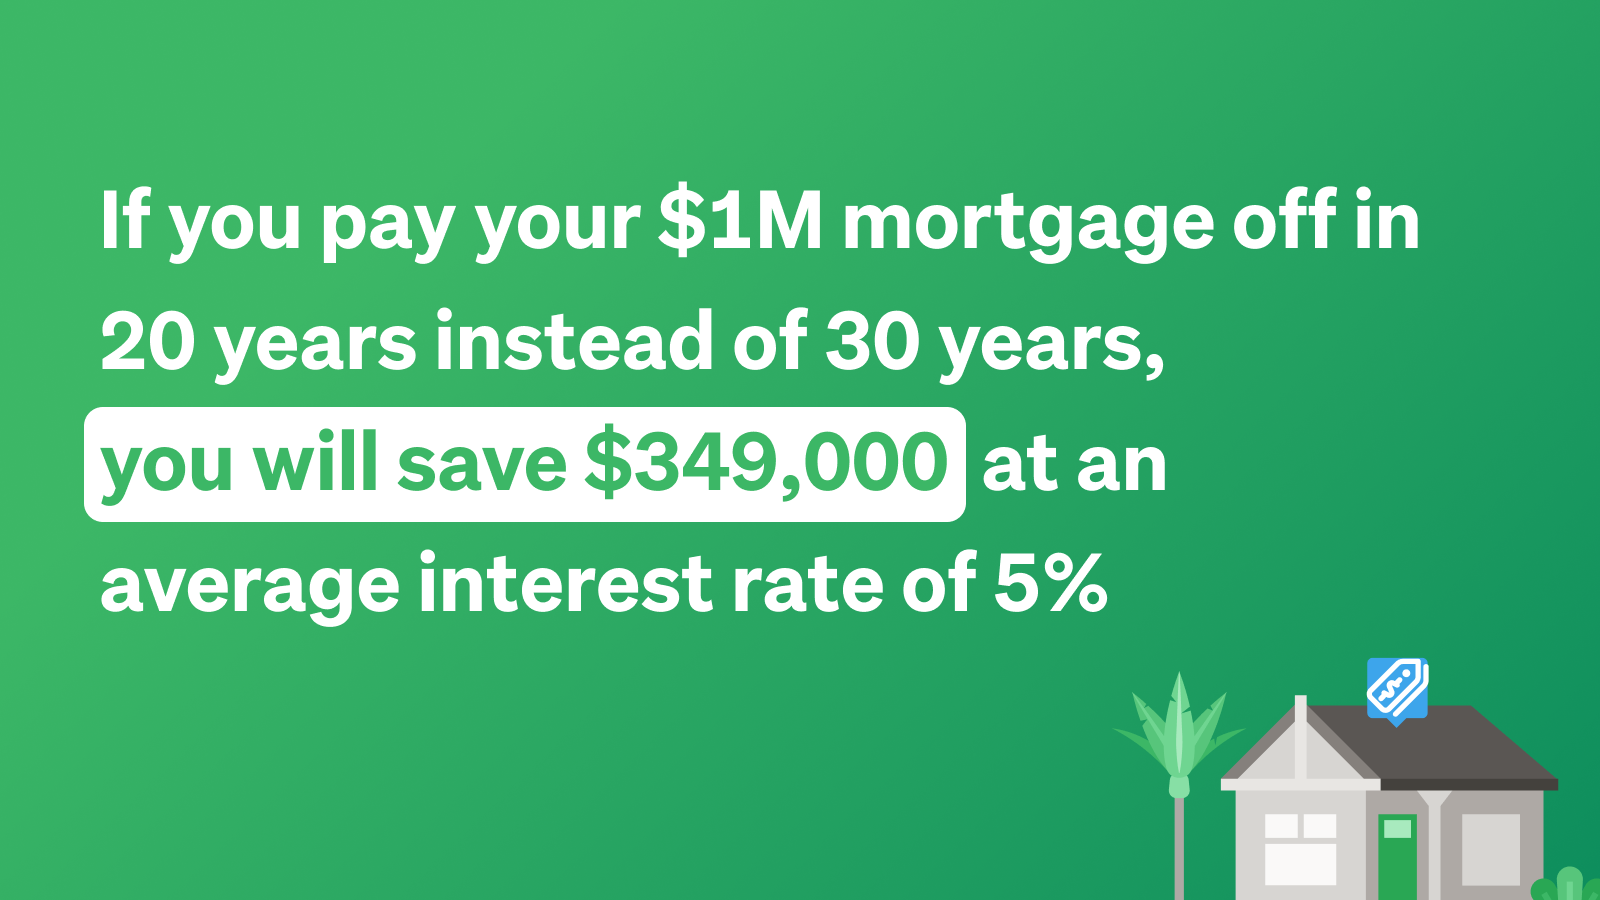 Text in image: If you pay your $1 million mortgage off in 20 years instead of 30 years, you will save $349,000, at an average interest rate of 5%